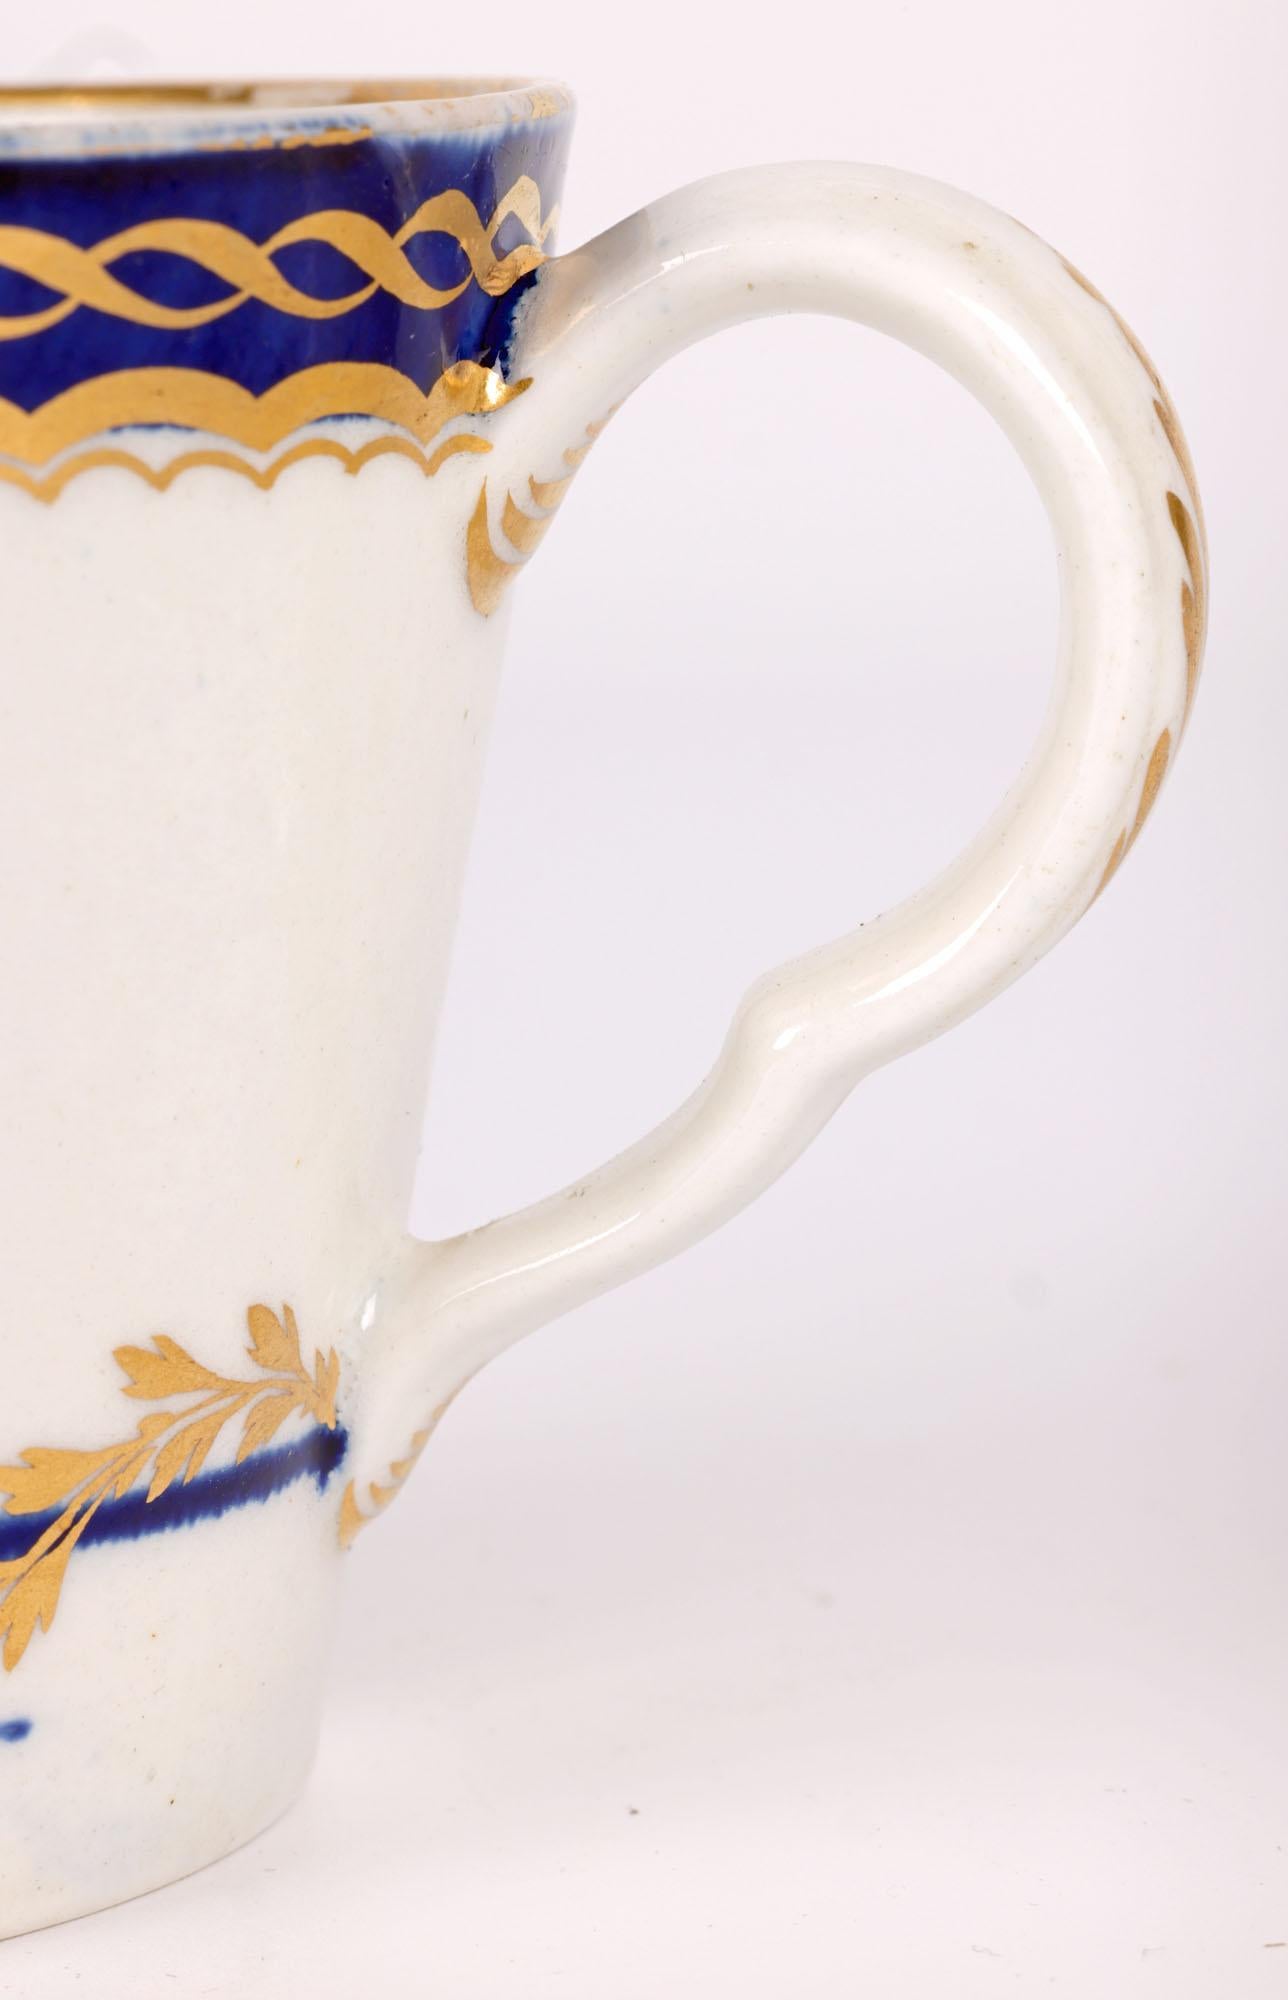 A scarce and fine antique English porcelain cream jug decorated with gilded patterning by Caughley and dating from around 1780. The pail shaped jug stands on a narrow round foot with a wide round top with a beak shaped pouring spout and ear shaped